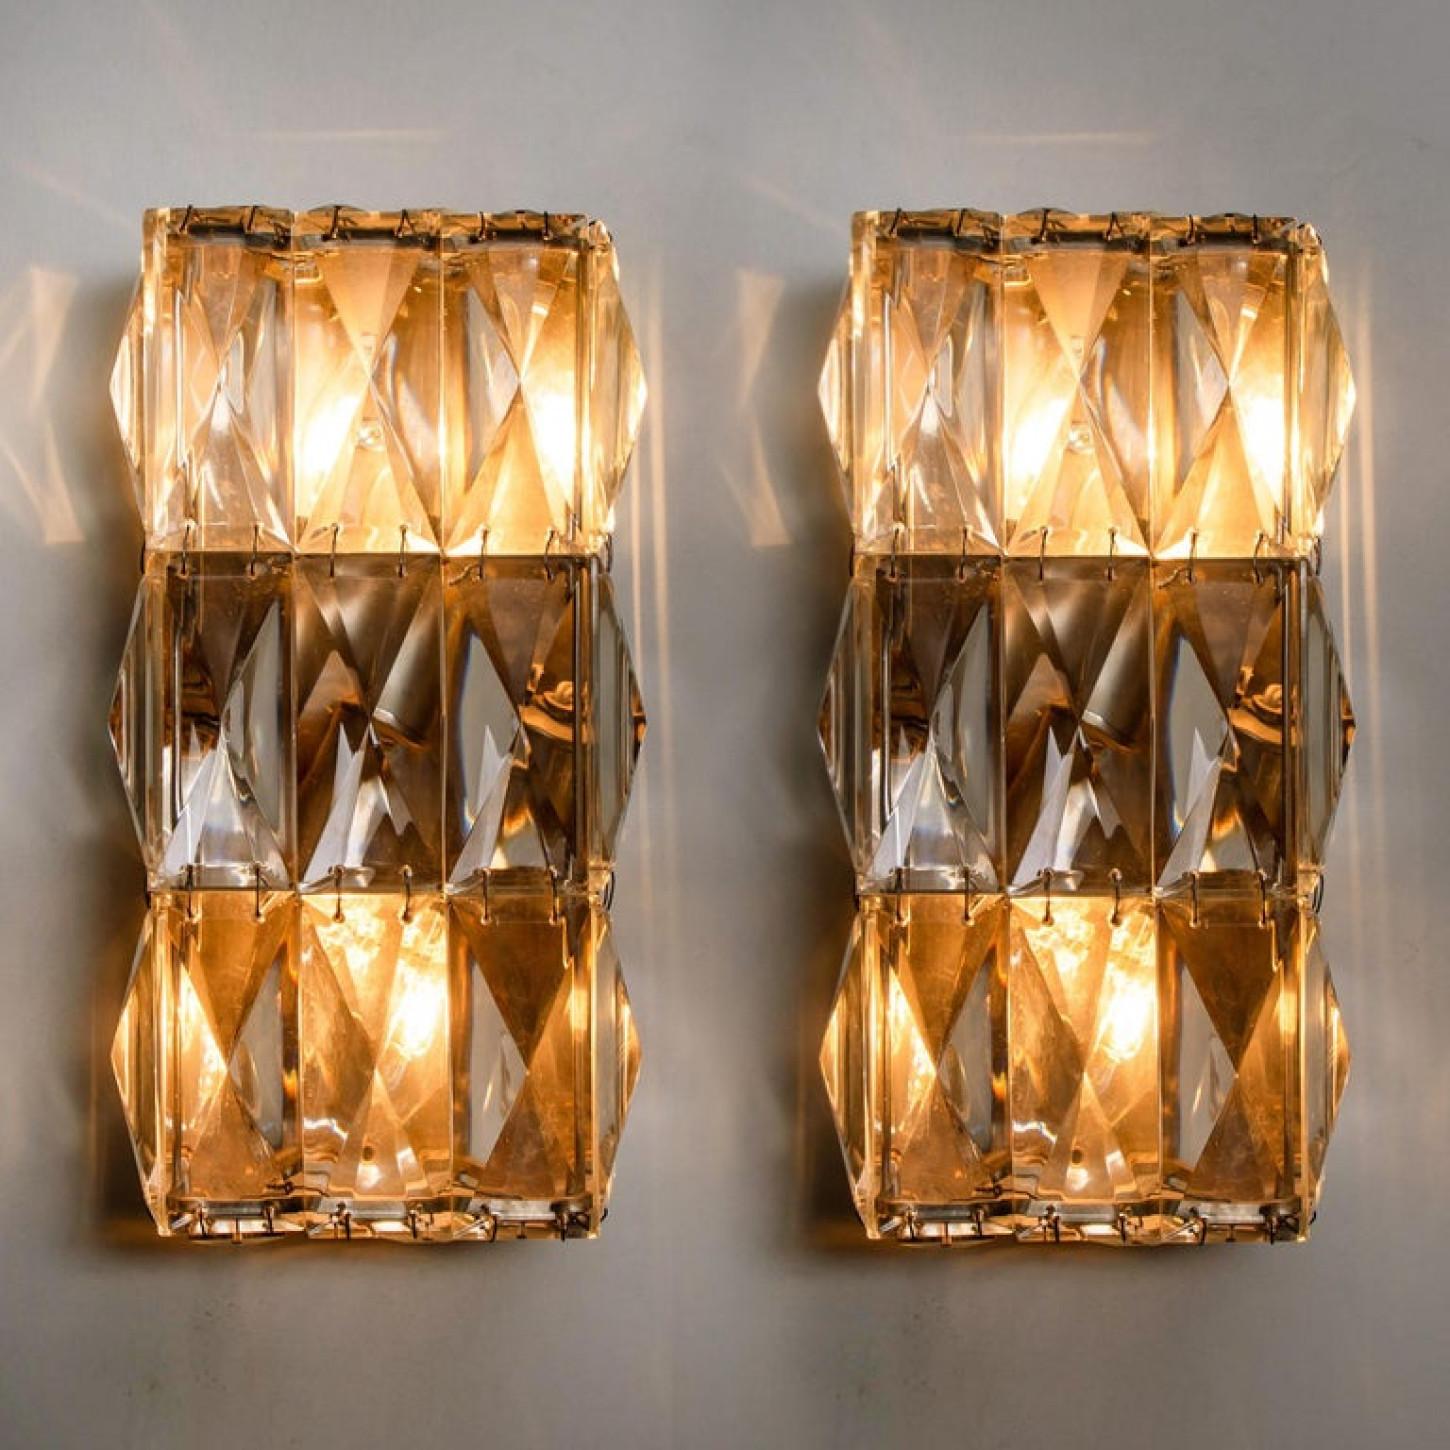 Late 20th Century Pair of Palwa Wall Light Fixtures, Chrome-Plated Crystal Glass, 1970 For Sale